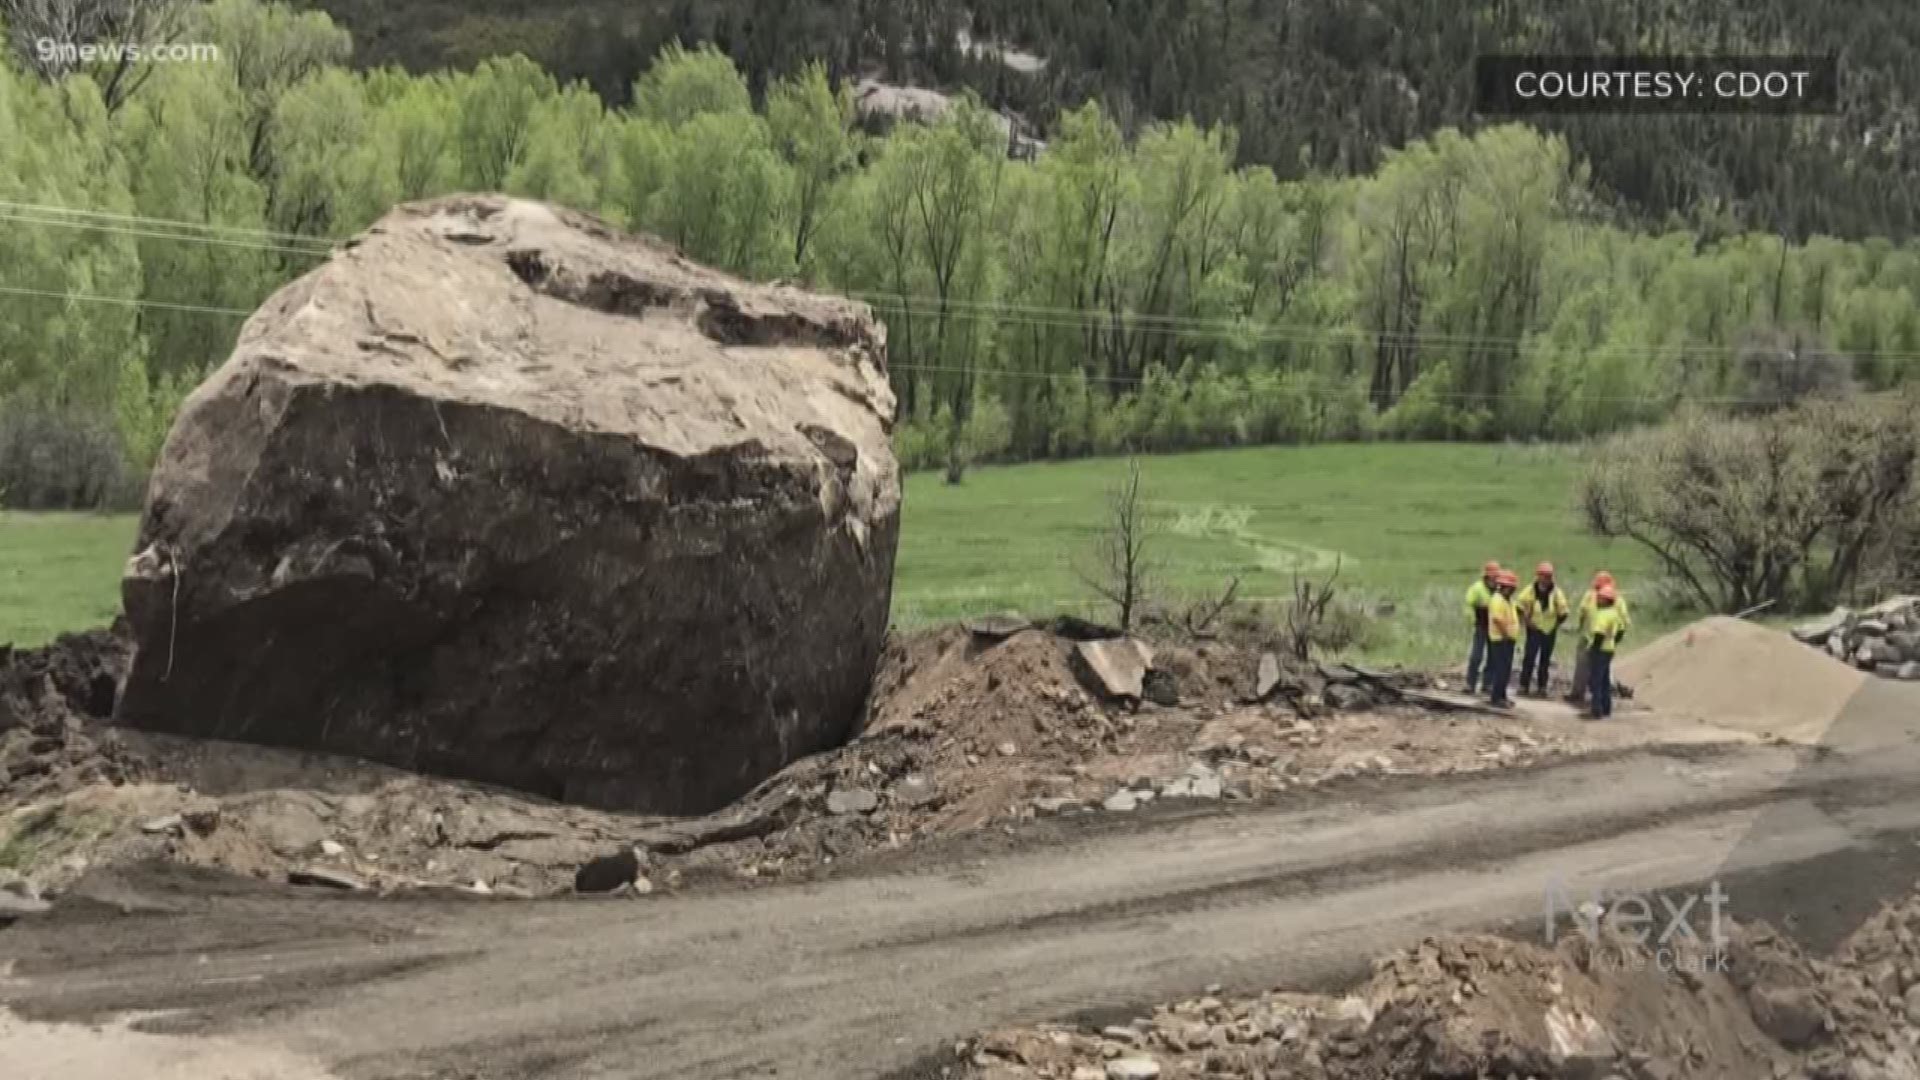 Our Next Question comes from a viewer named Terry. She asks:  "Any idea if the rocks that came down by Dolores, Colorado showed up on the earthquake seismometers?"